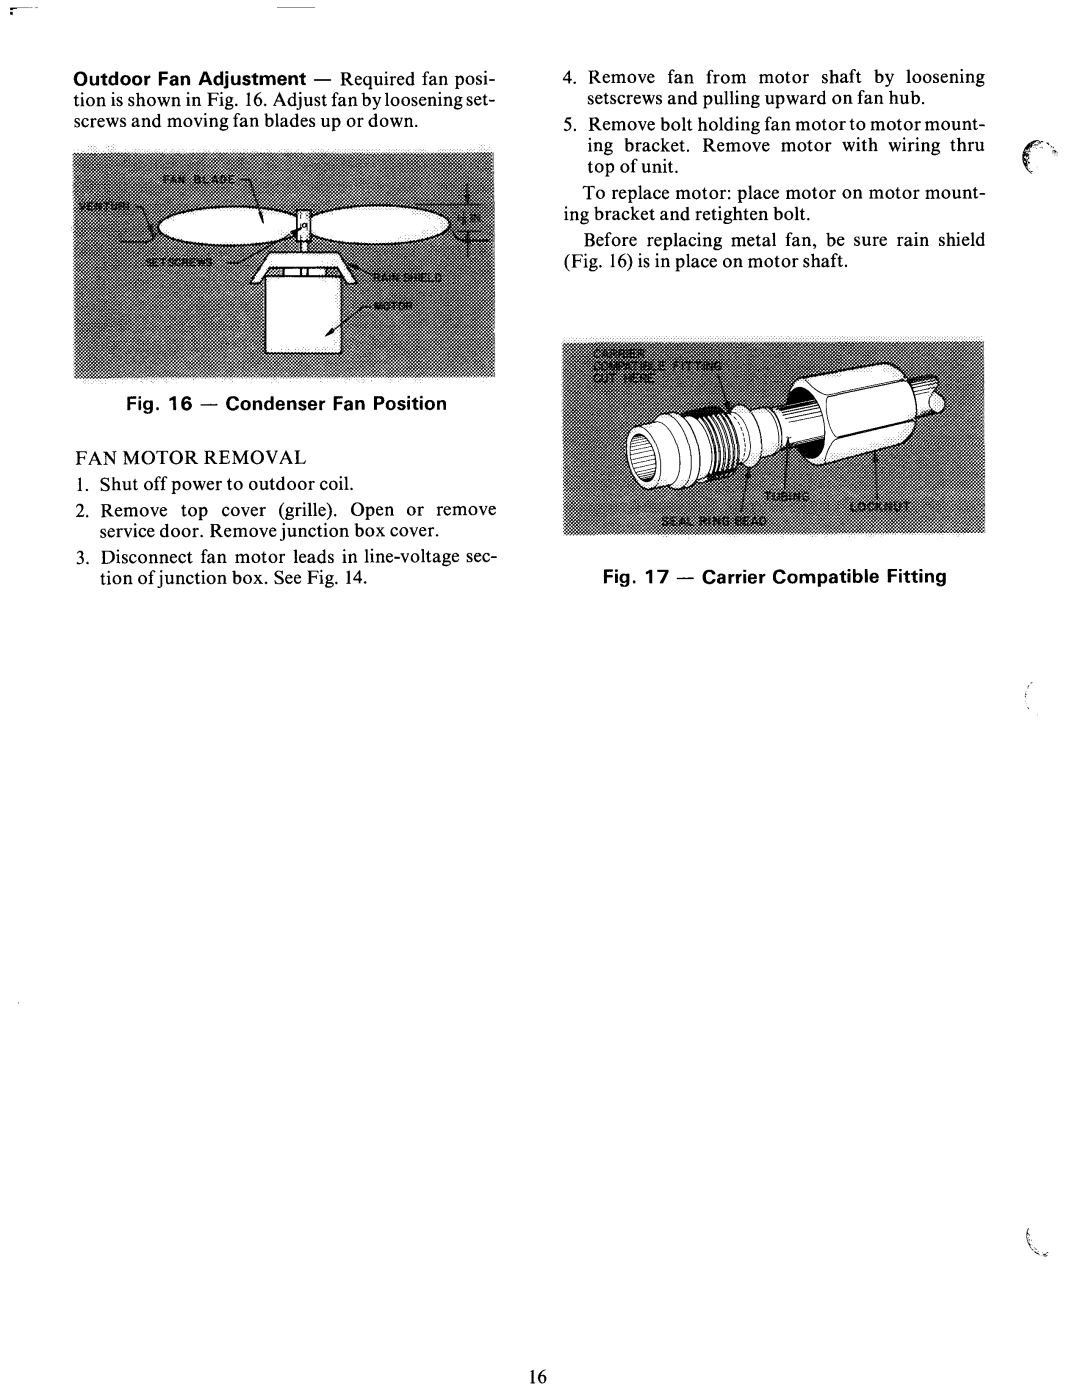 Carrier 38HQ manual 